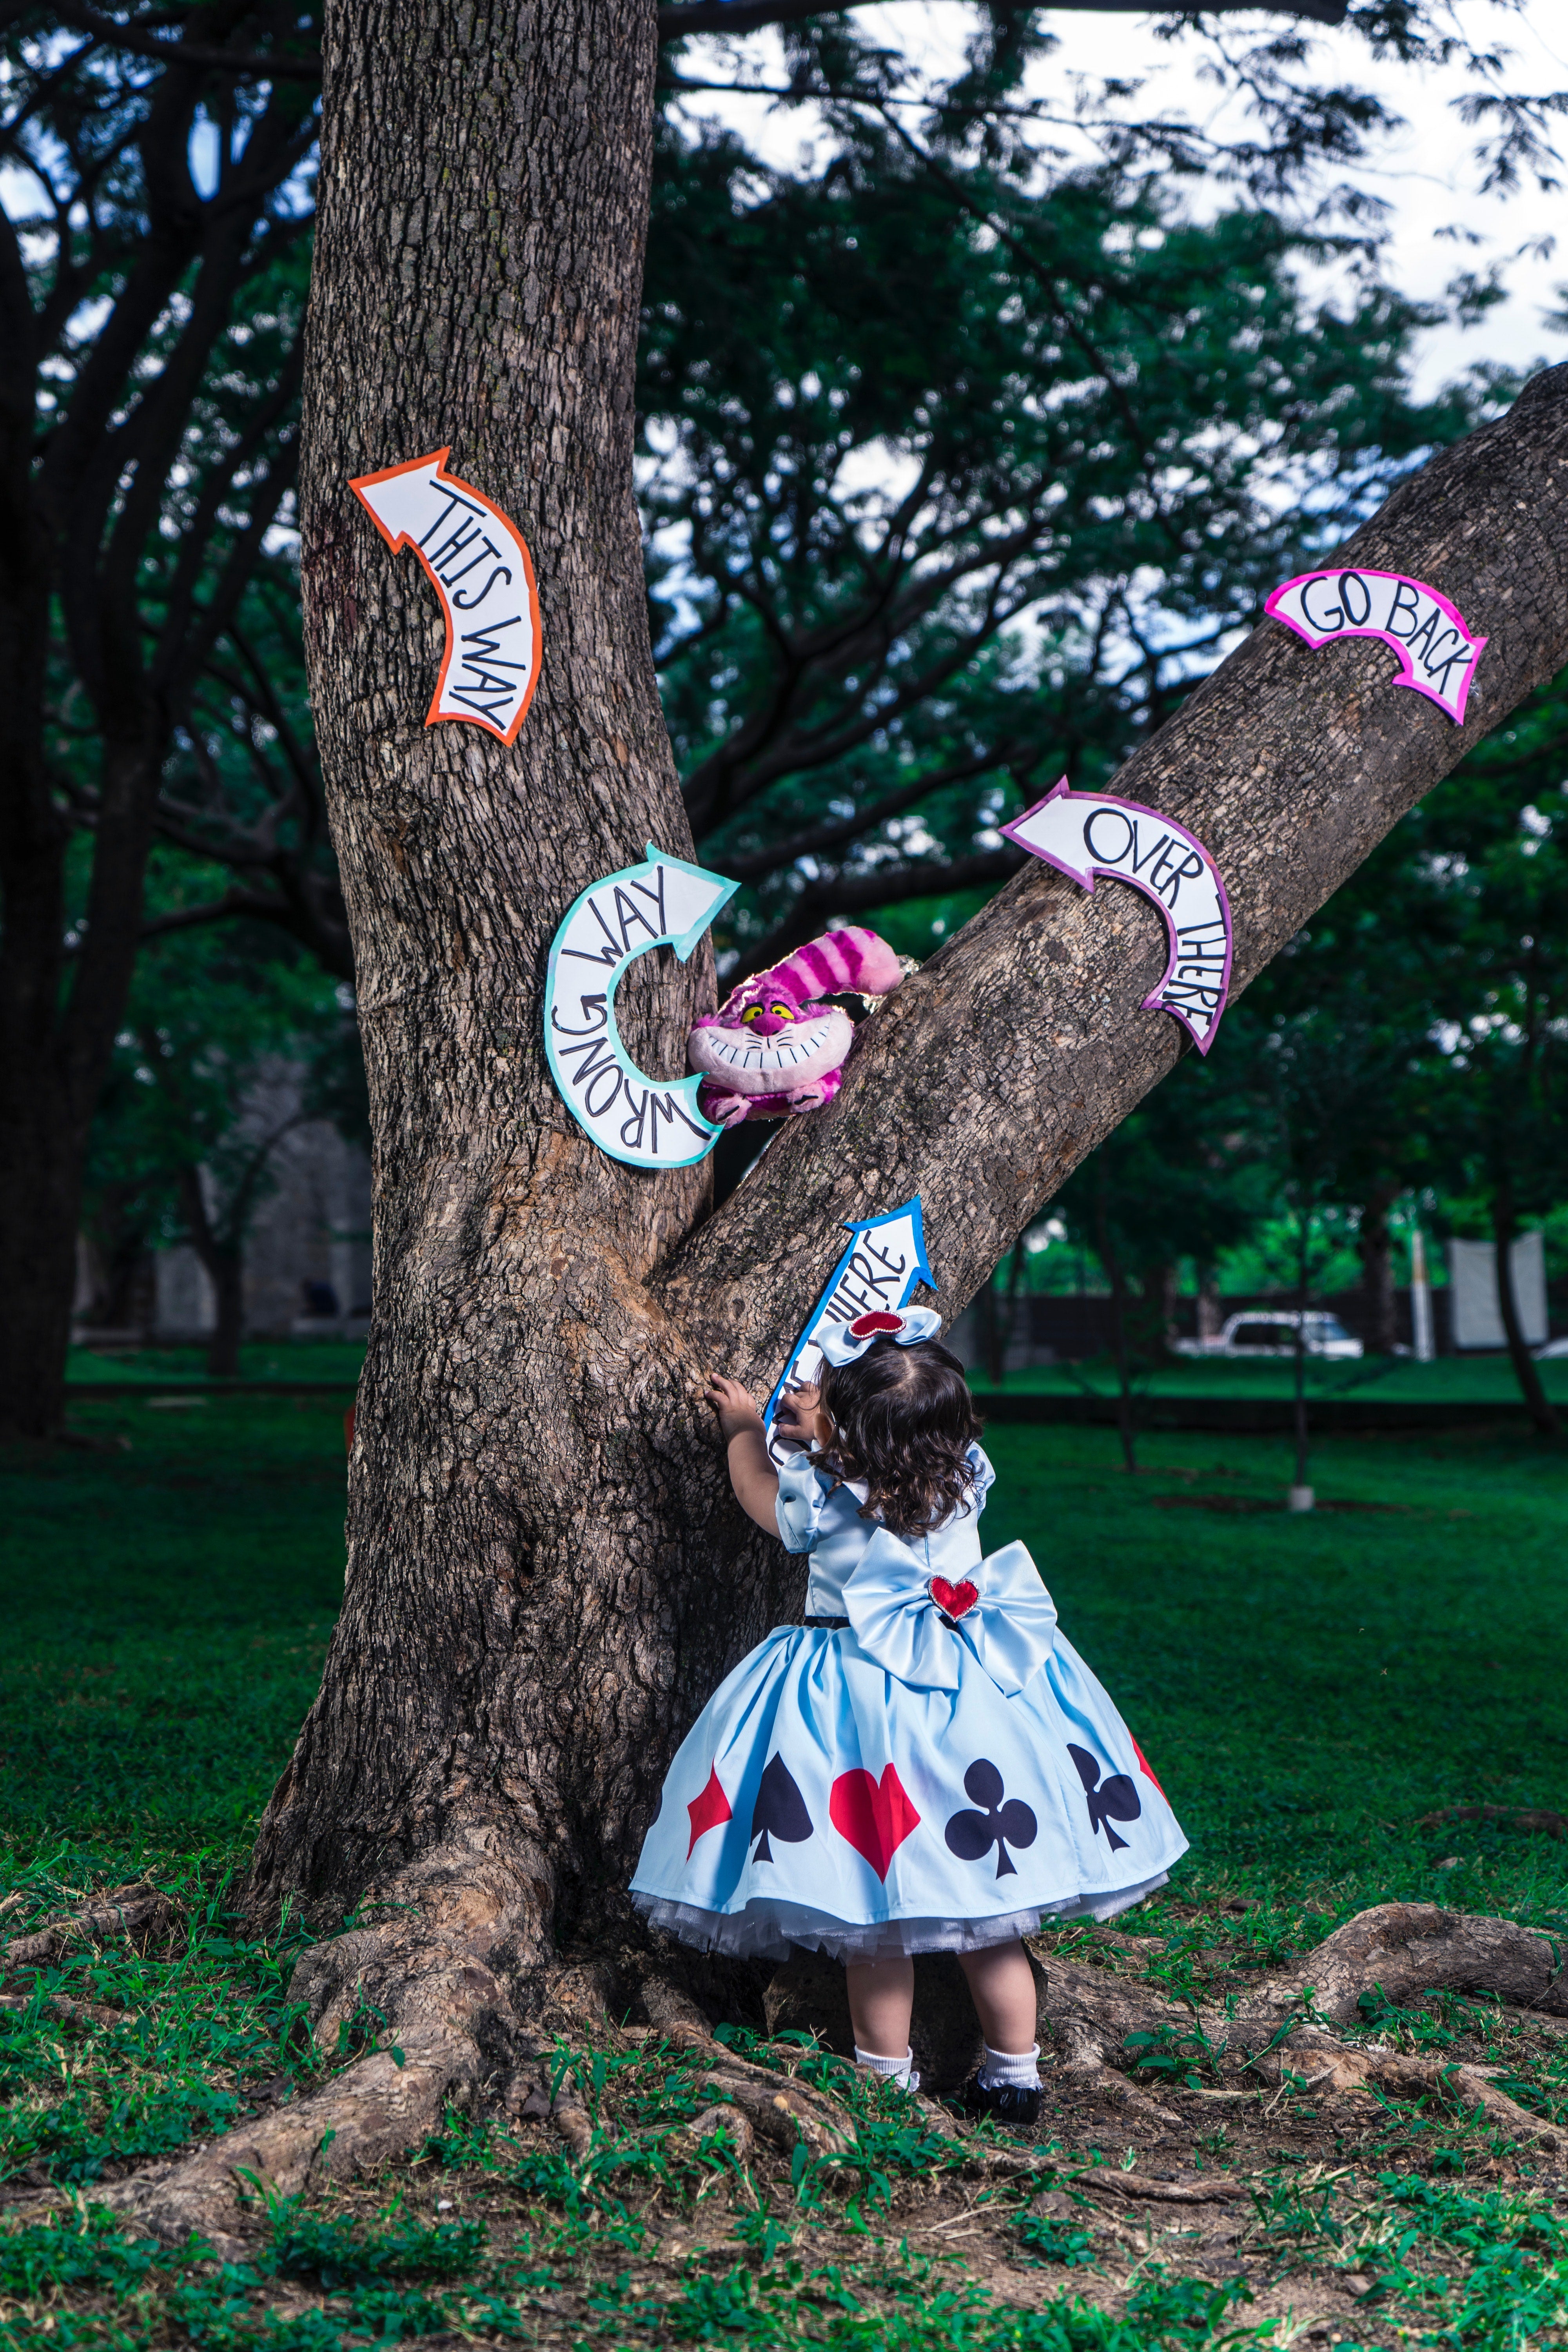 A girl in a dress with symbols of card suits glues inscriptions on a tree